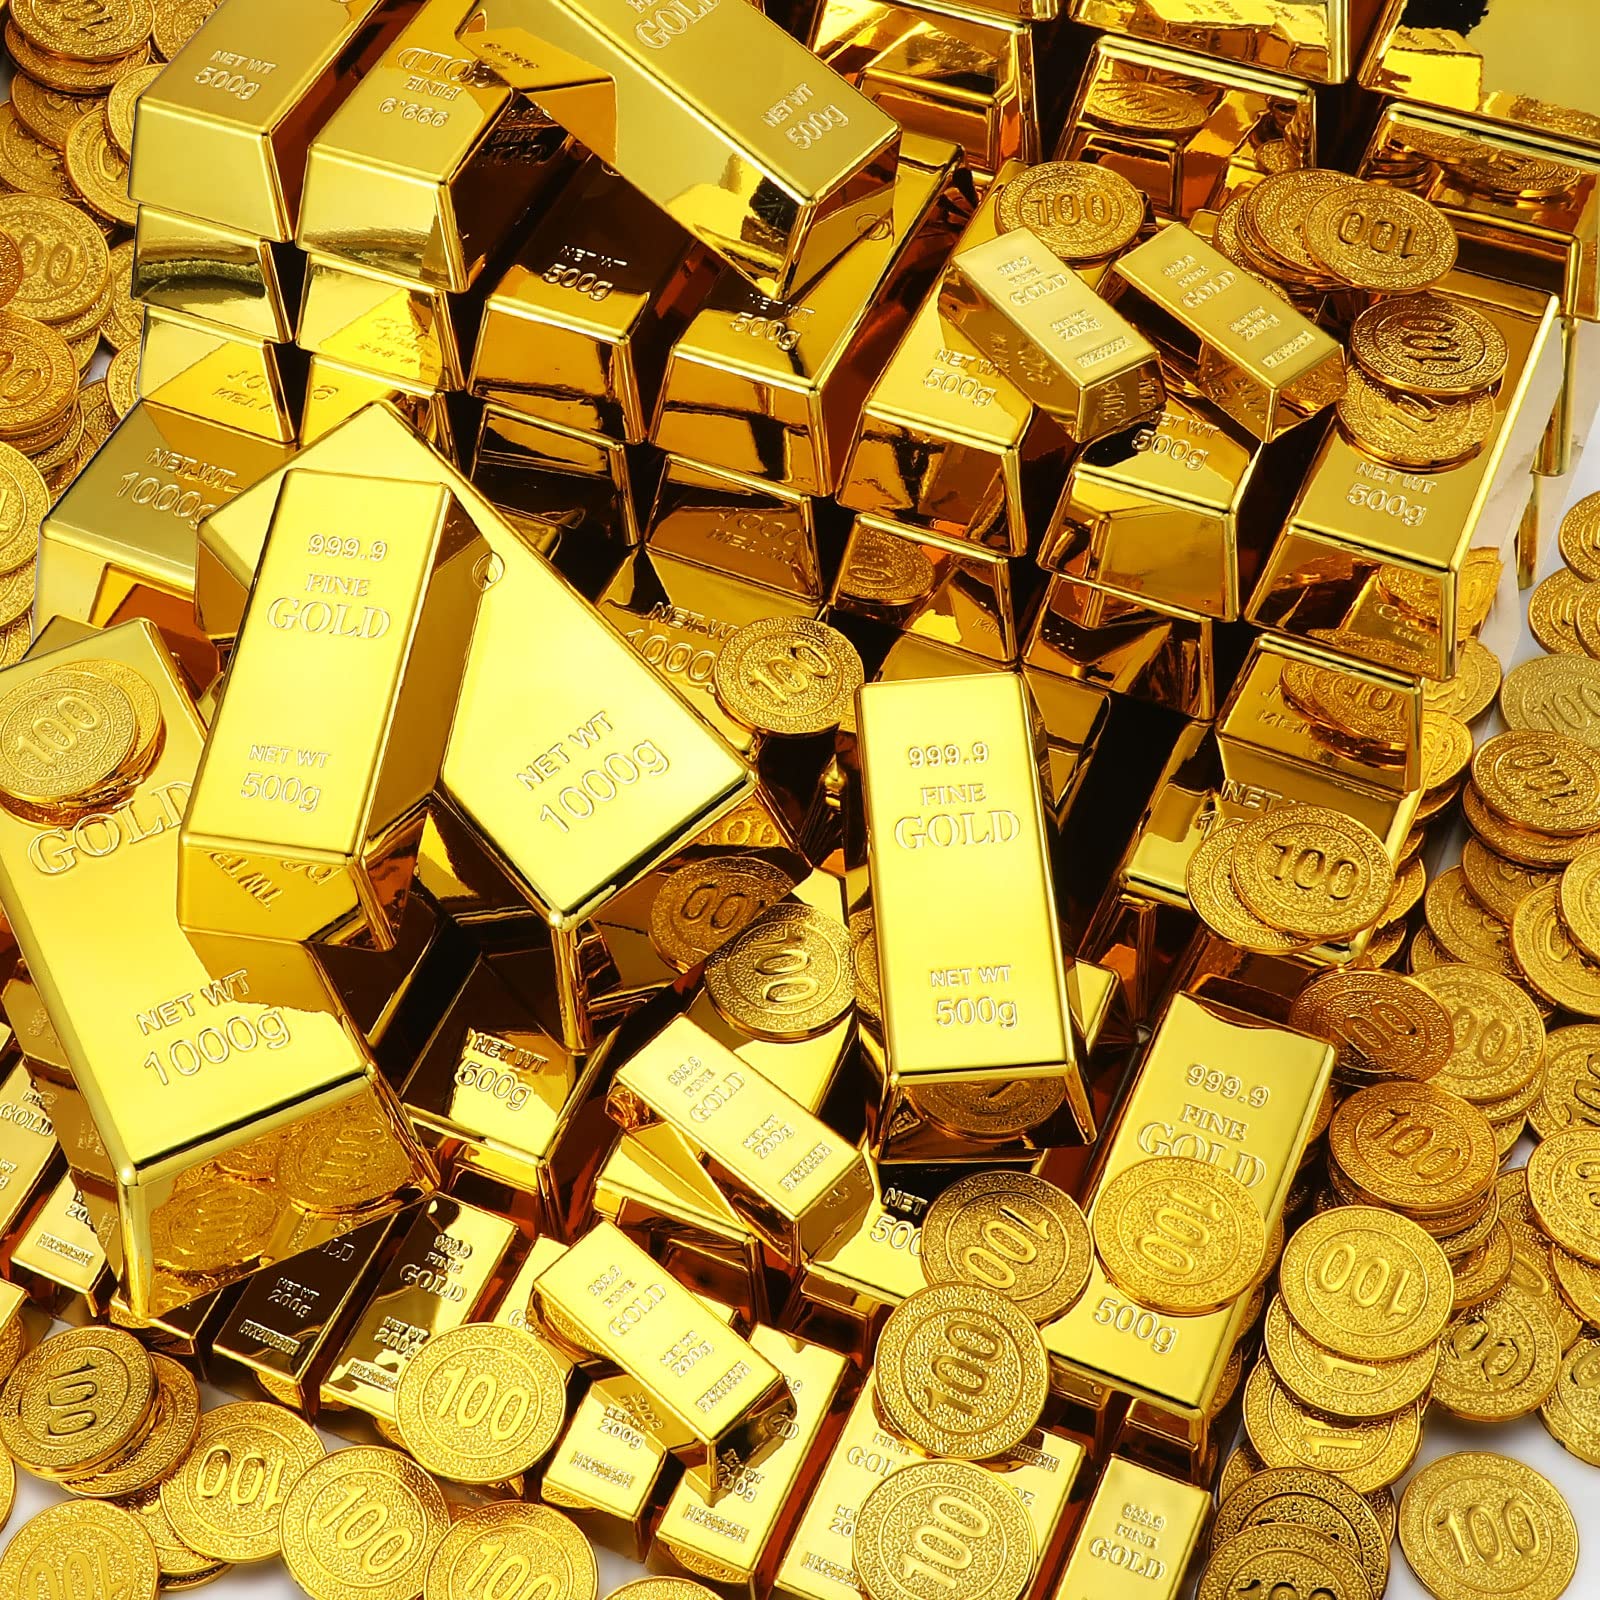 Image of gold coins or gold bars.